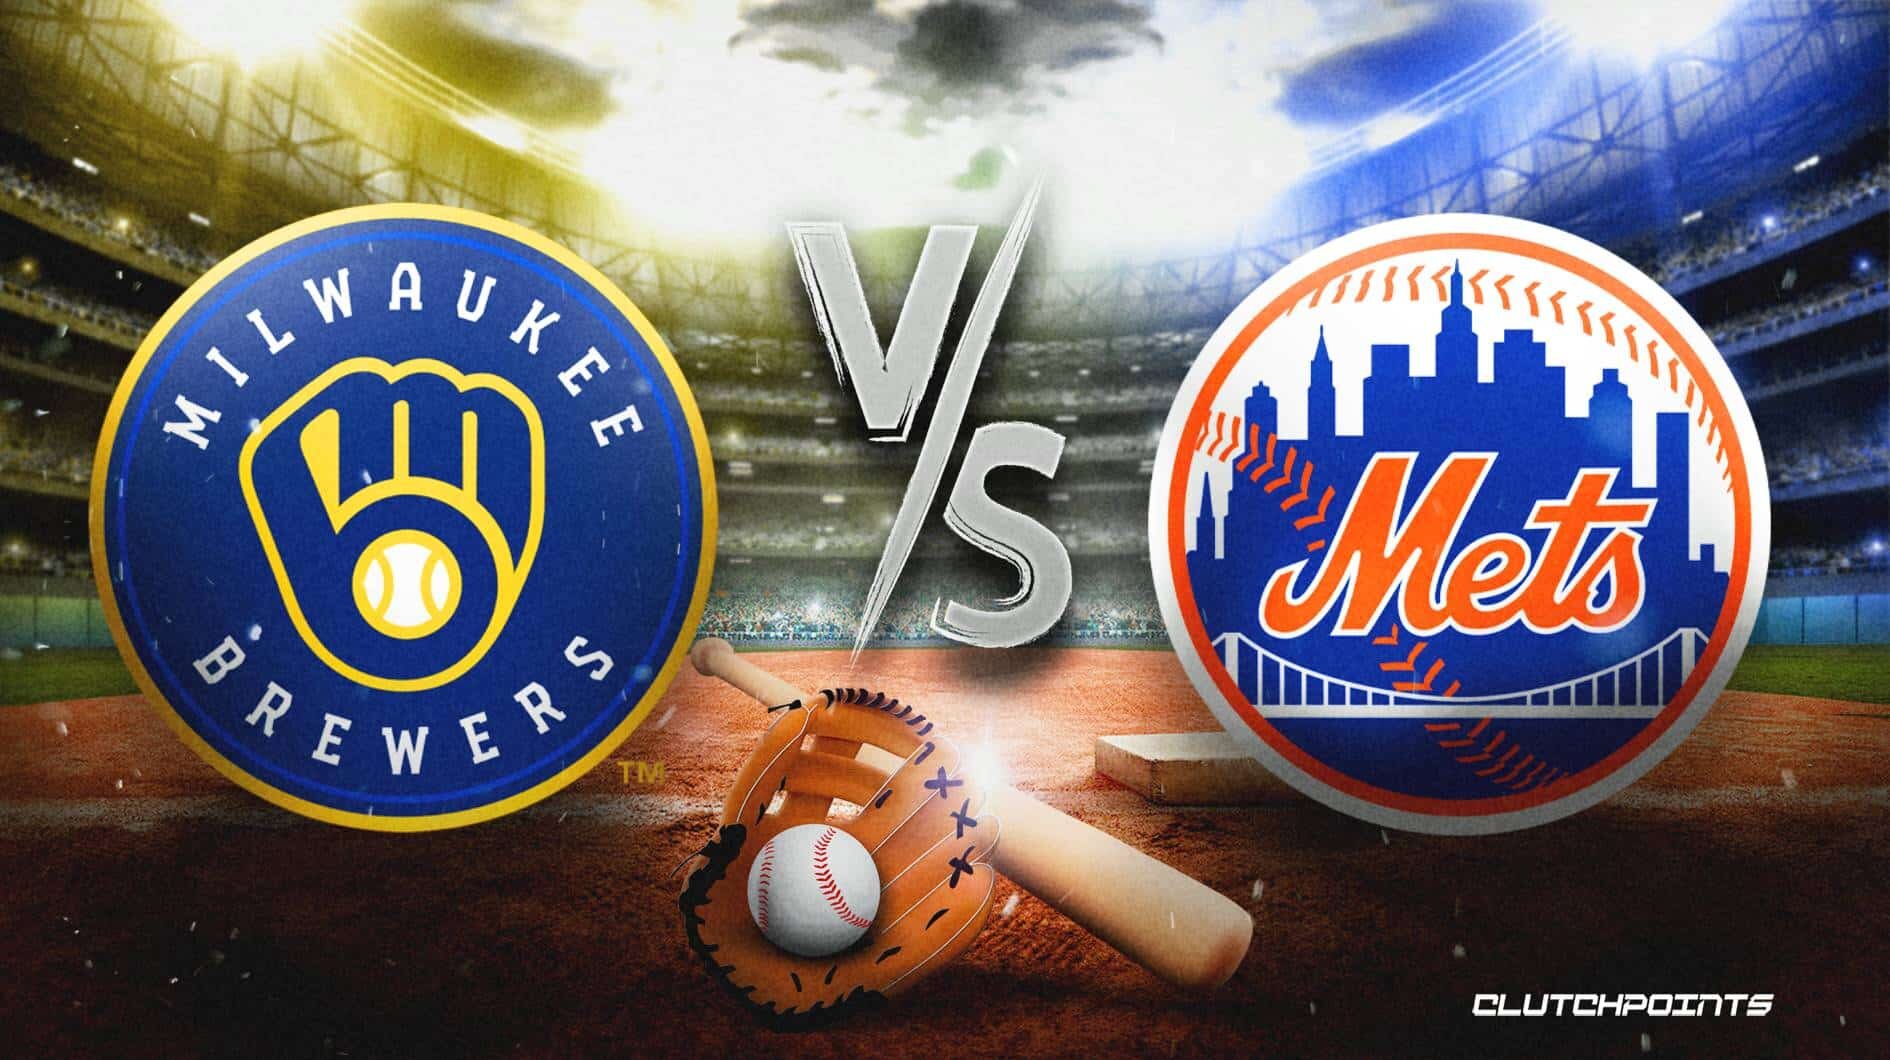 Breaking news: Brewers make bold step to sign Mets 5 star player in a blockbuster trade